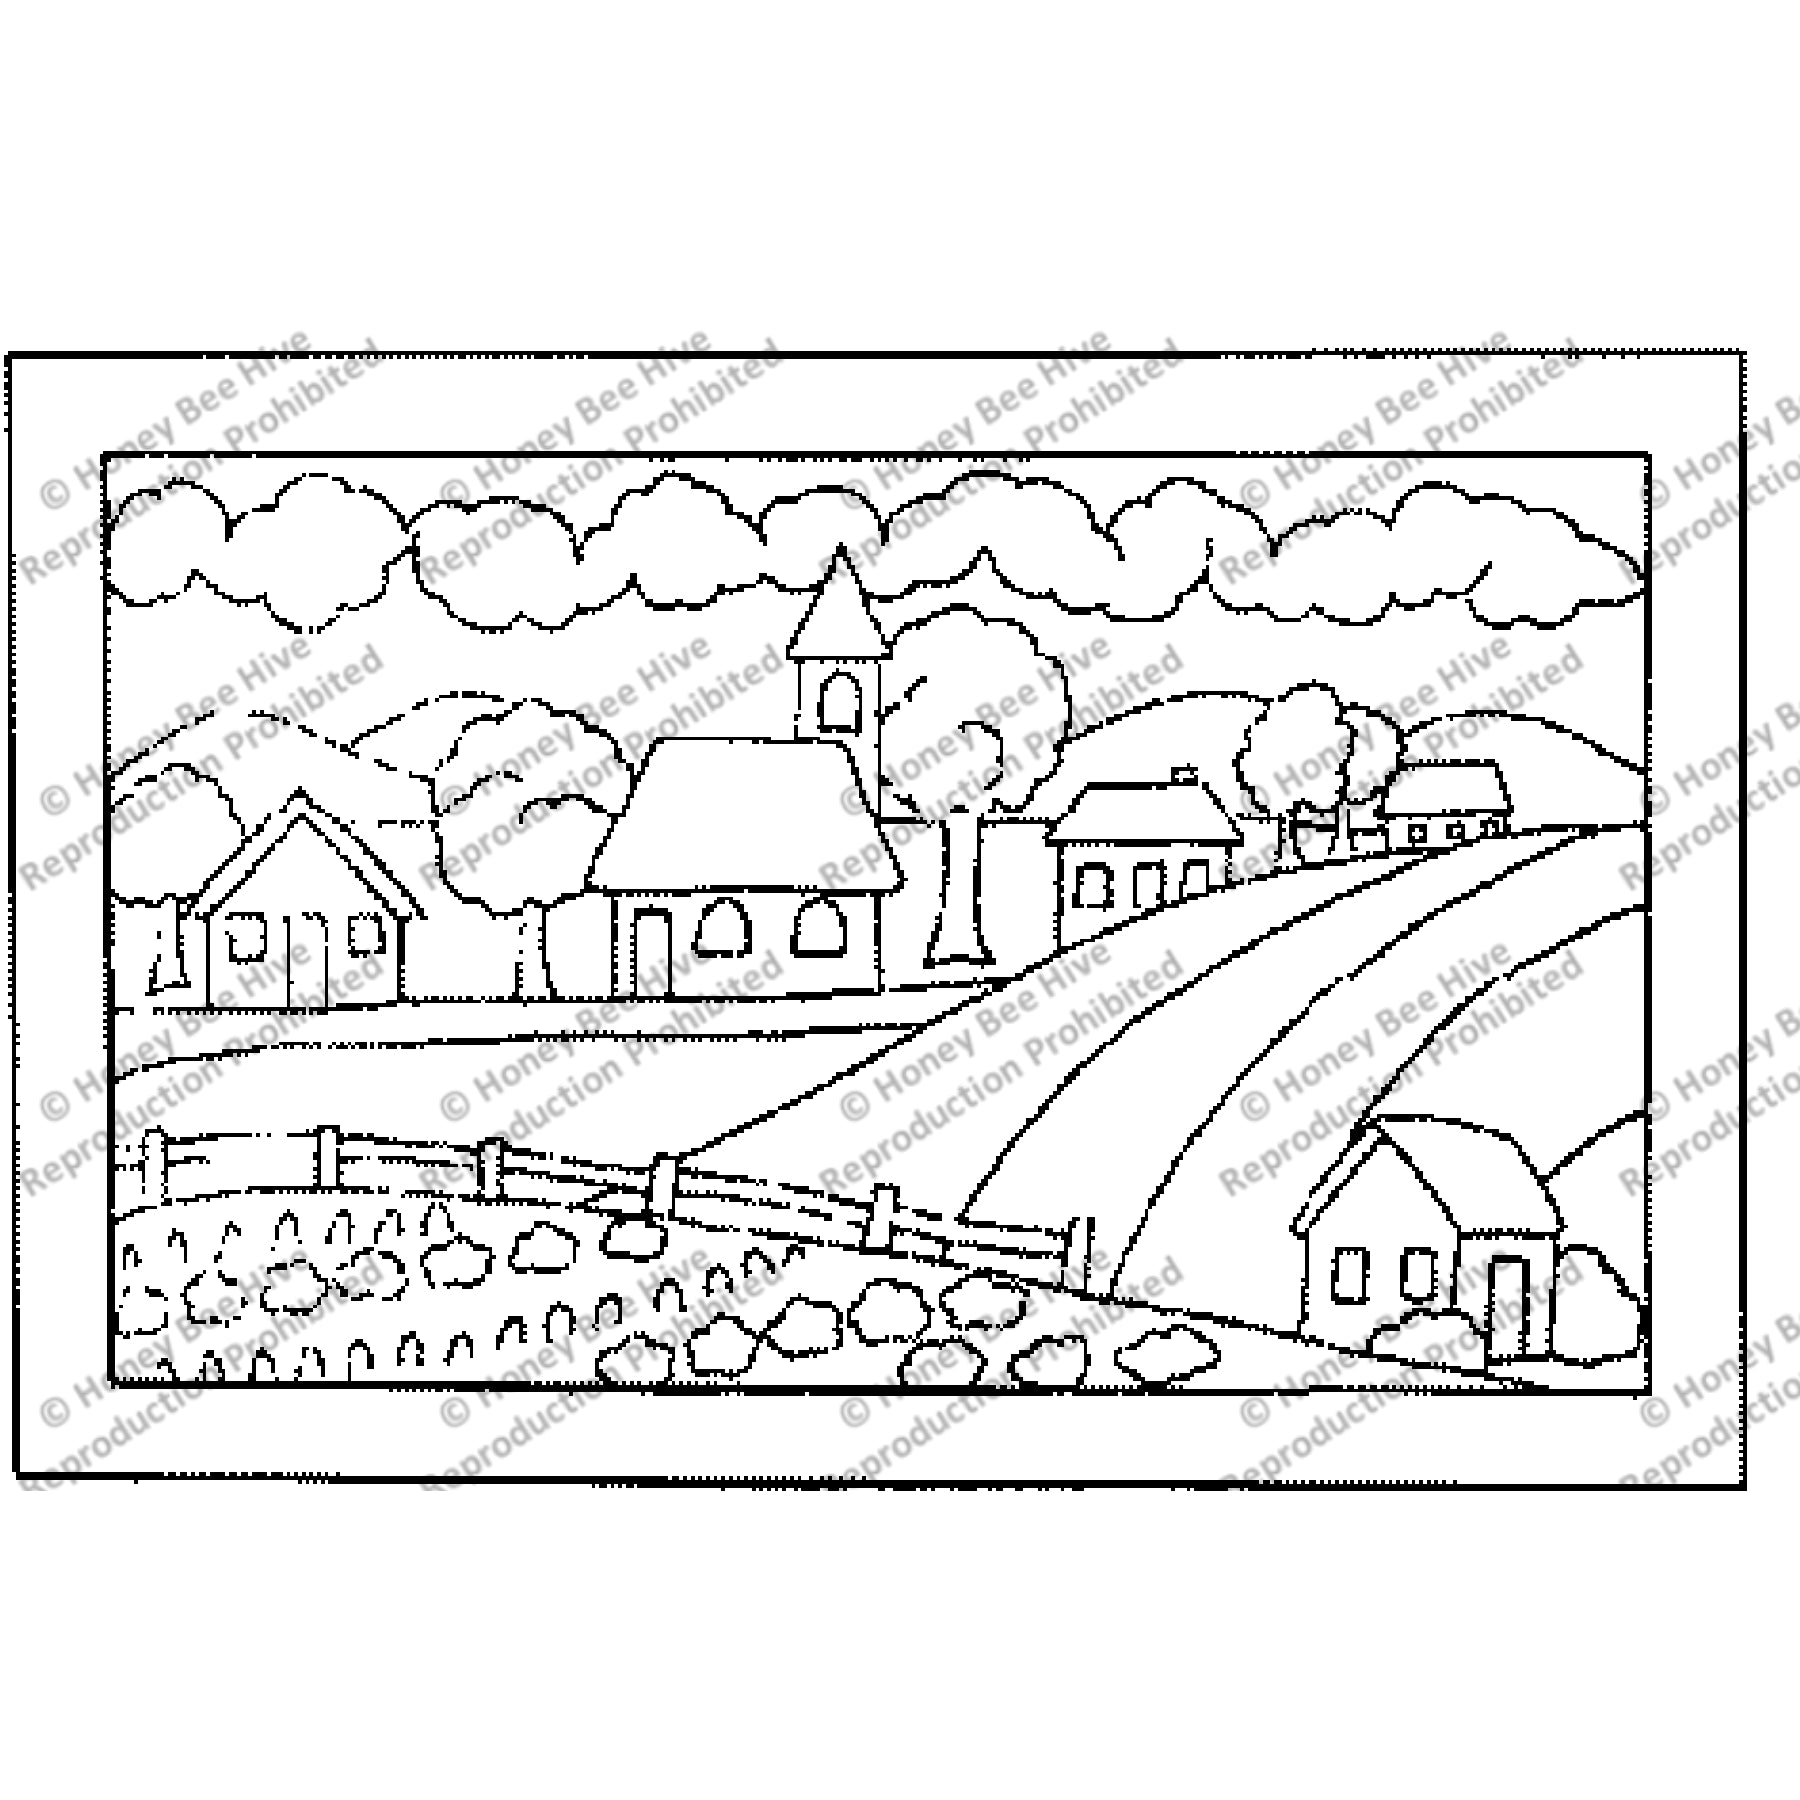 A Country Village, rug hooking pattern